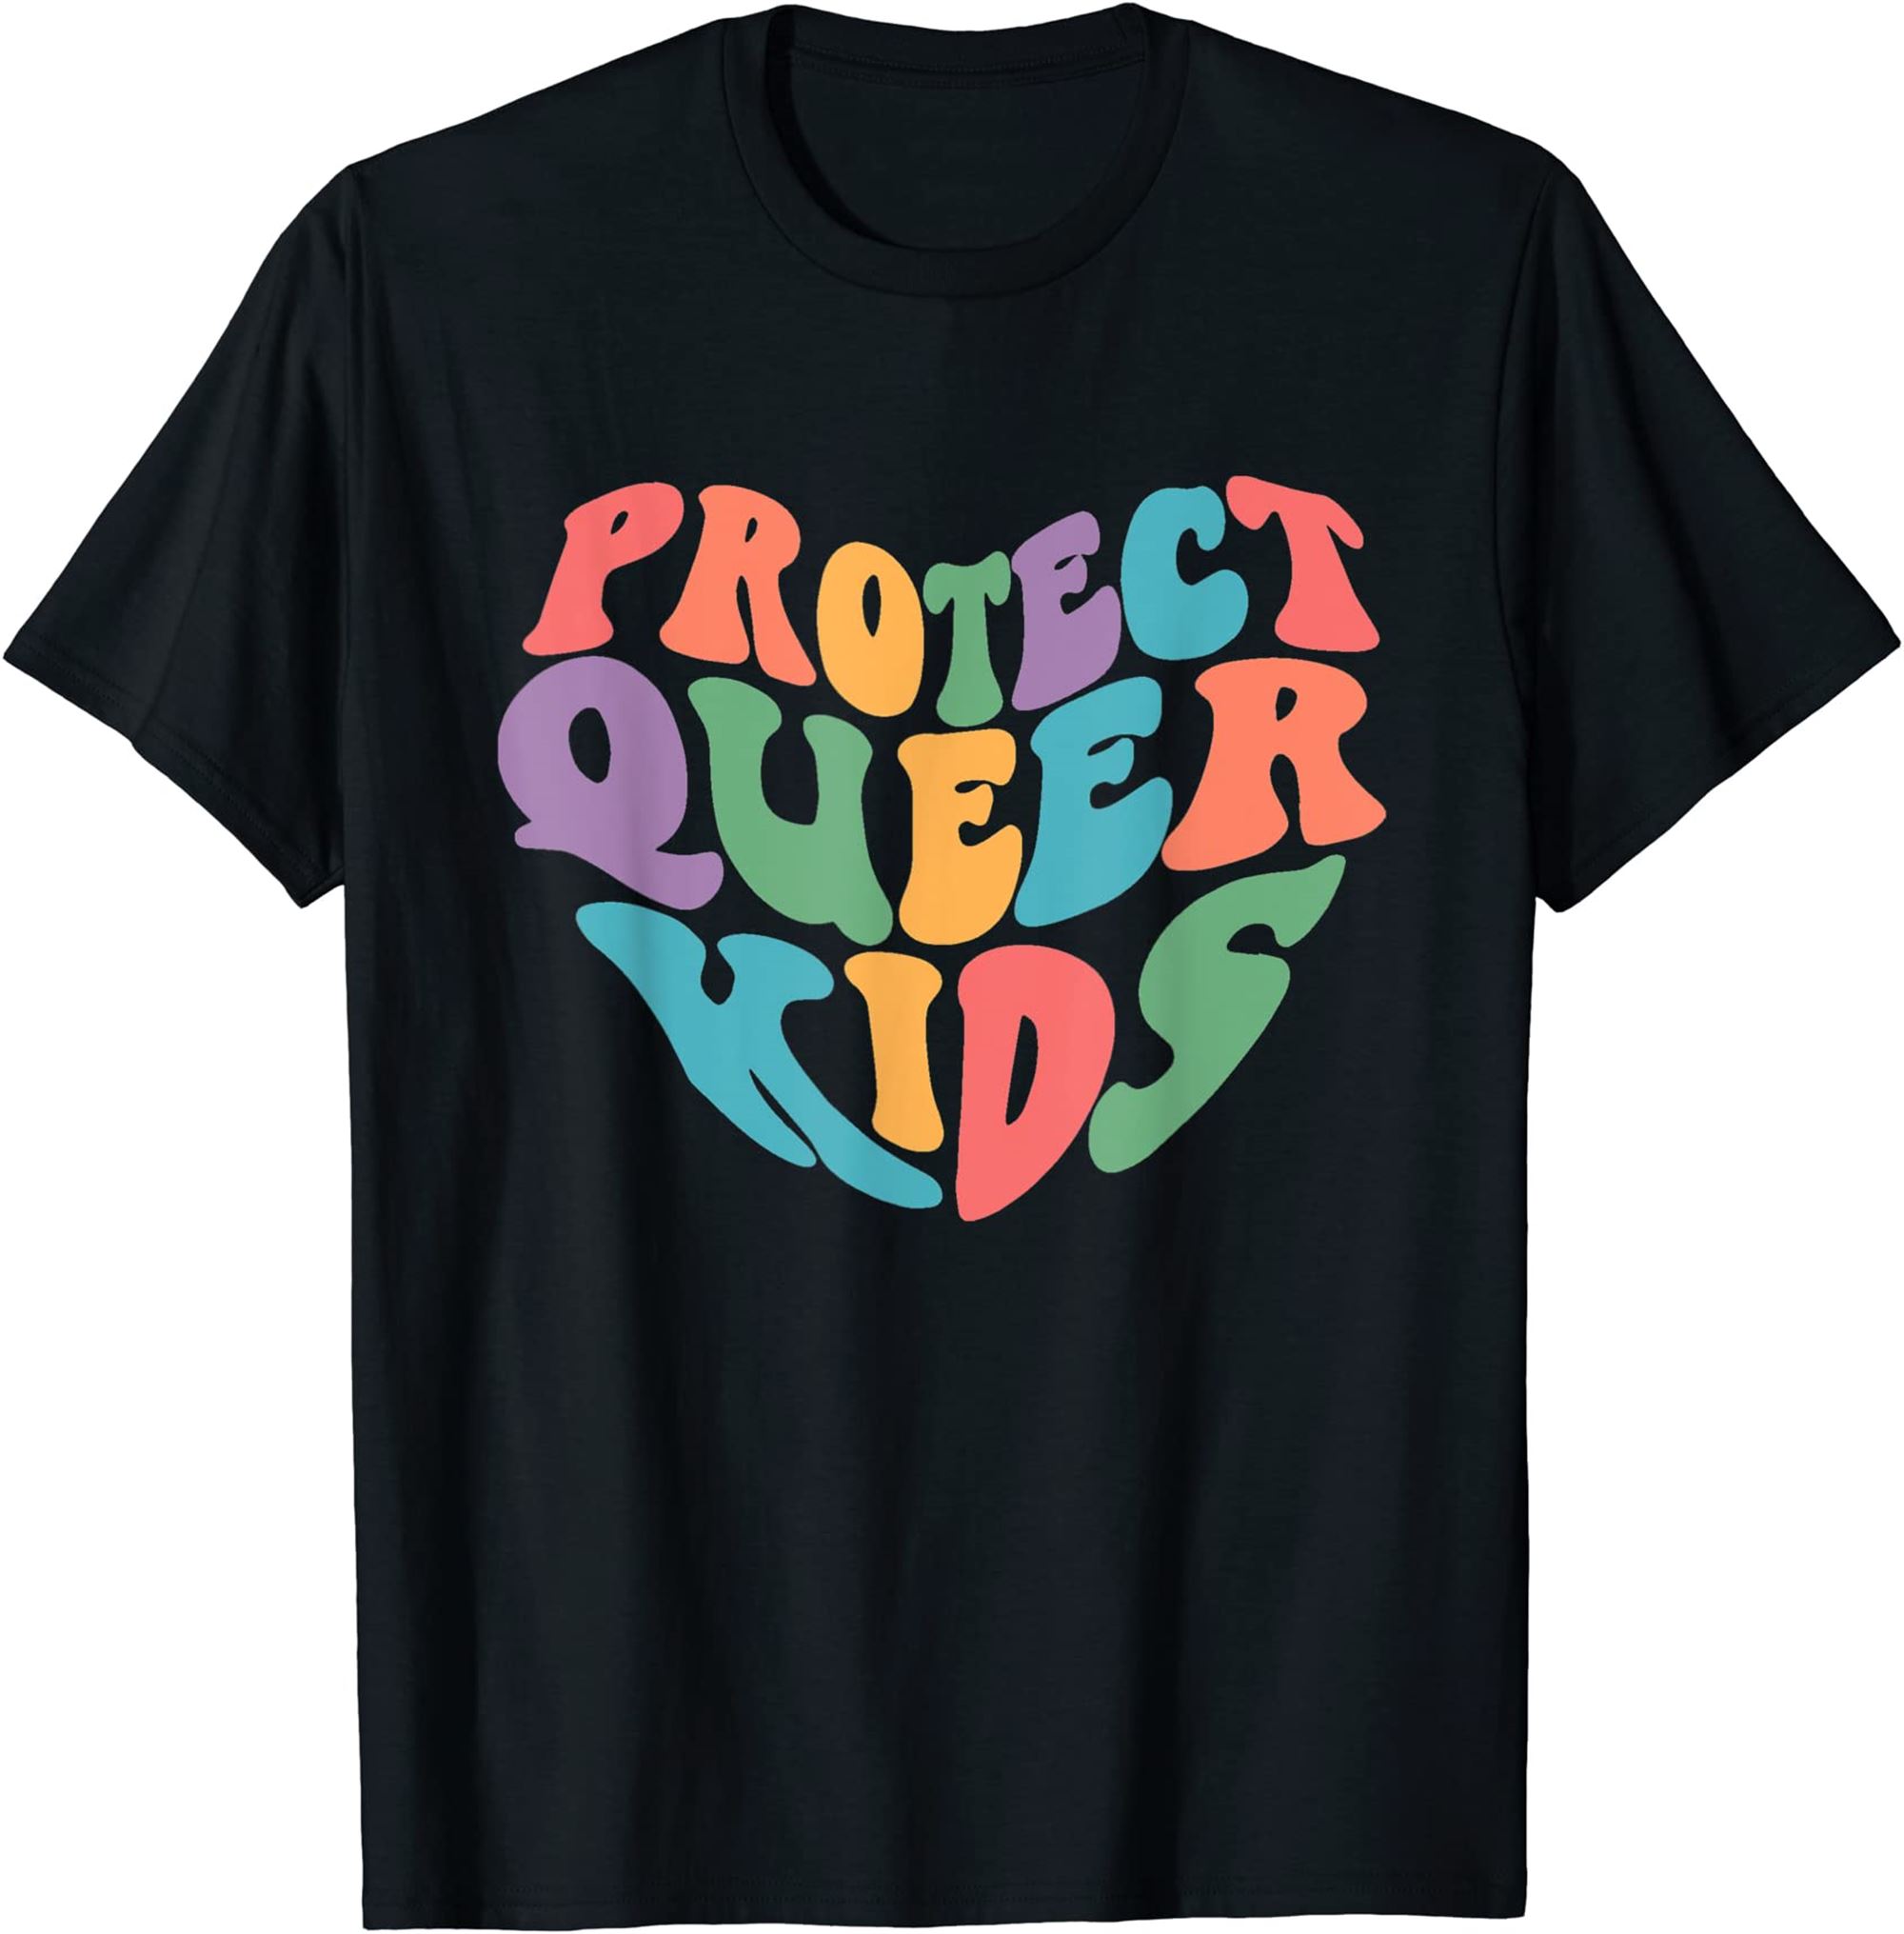 Protect Trans Kids Queer Lgbtq Say Gay Pride Support Queer T-shirt Size Up To 5xl